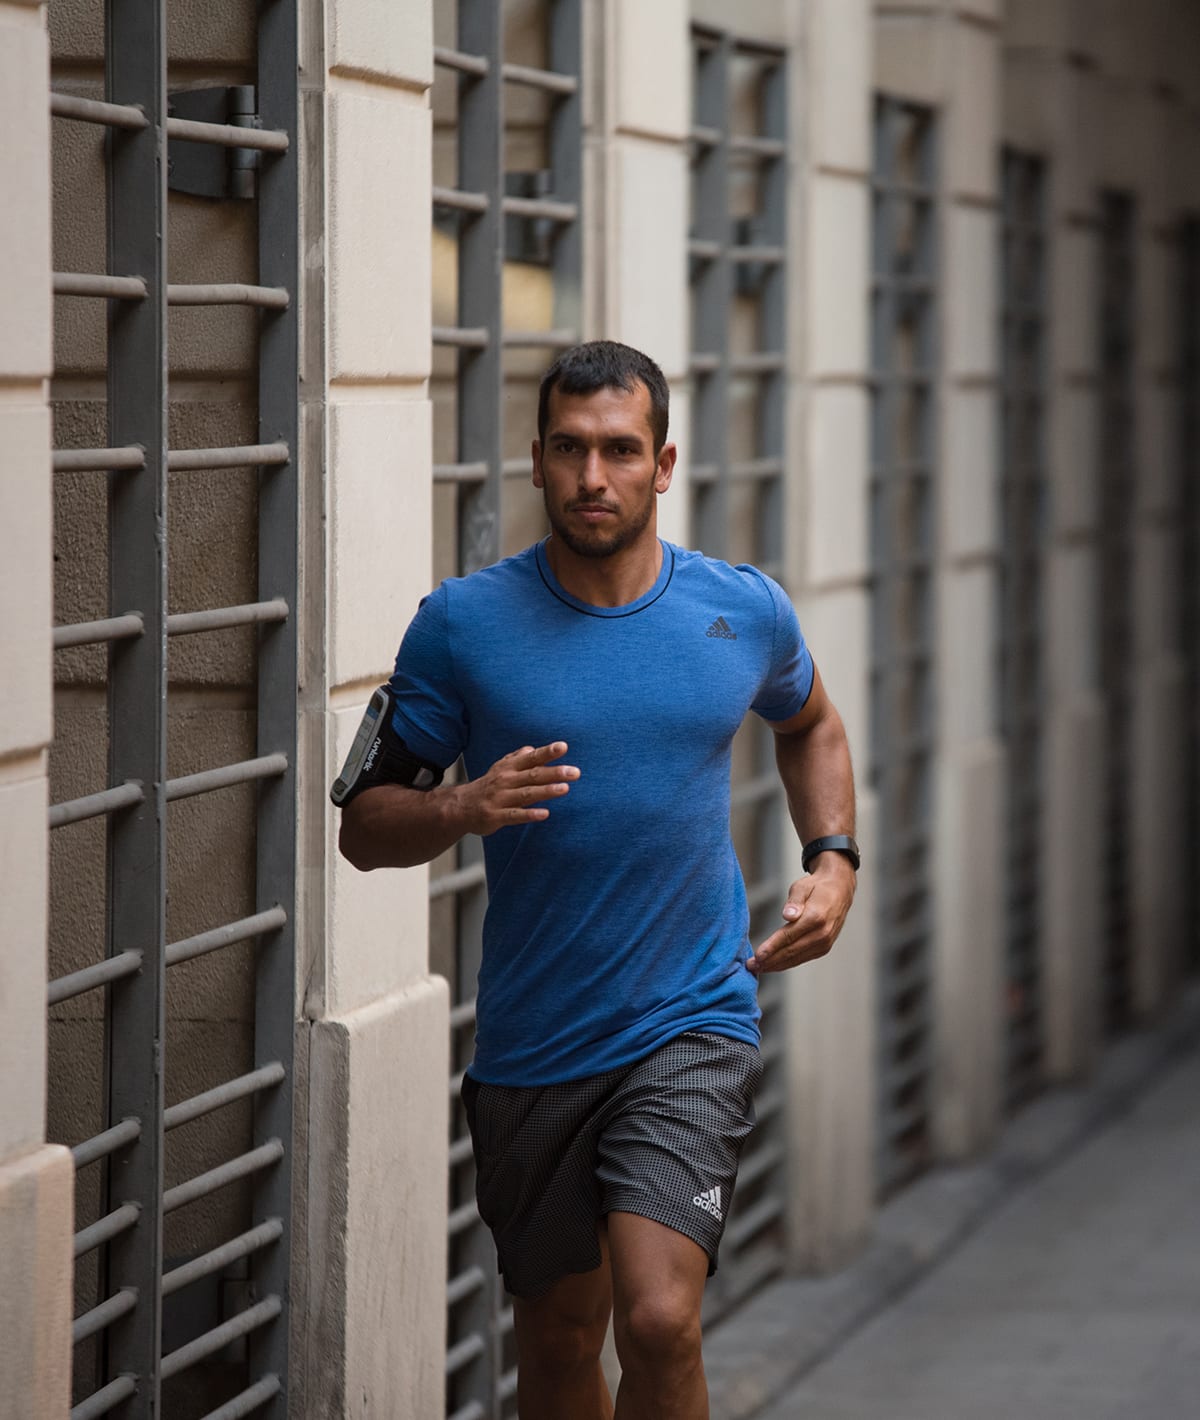 The 3 Most Effective Running Workouts For Losing Weight